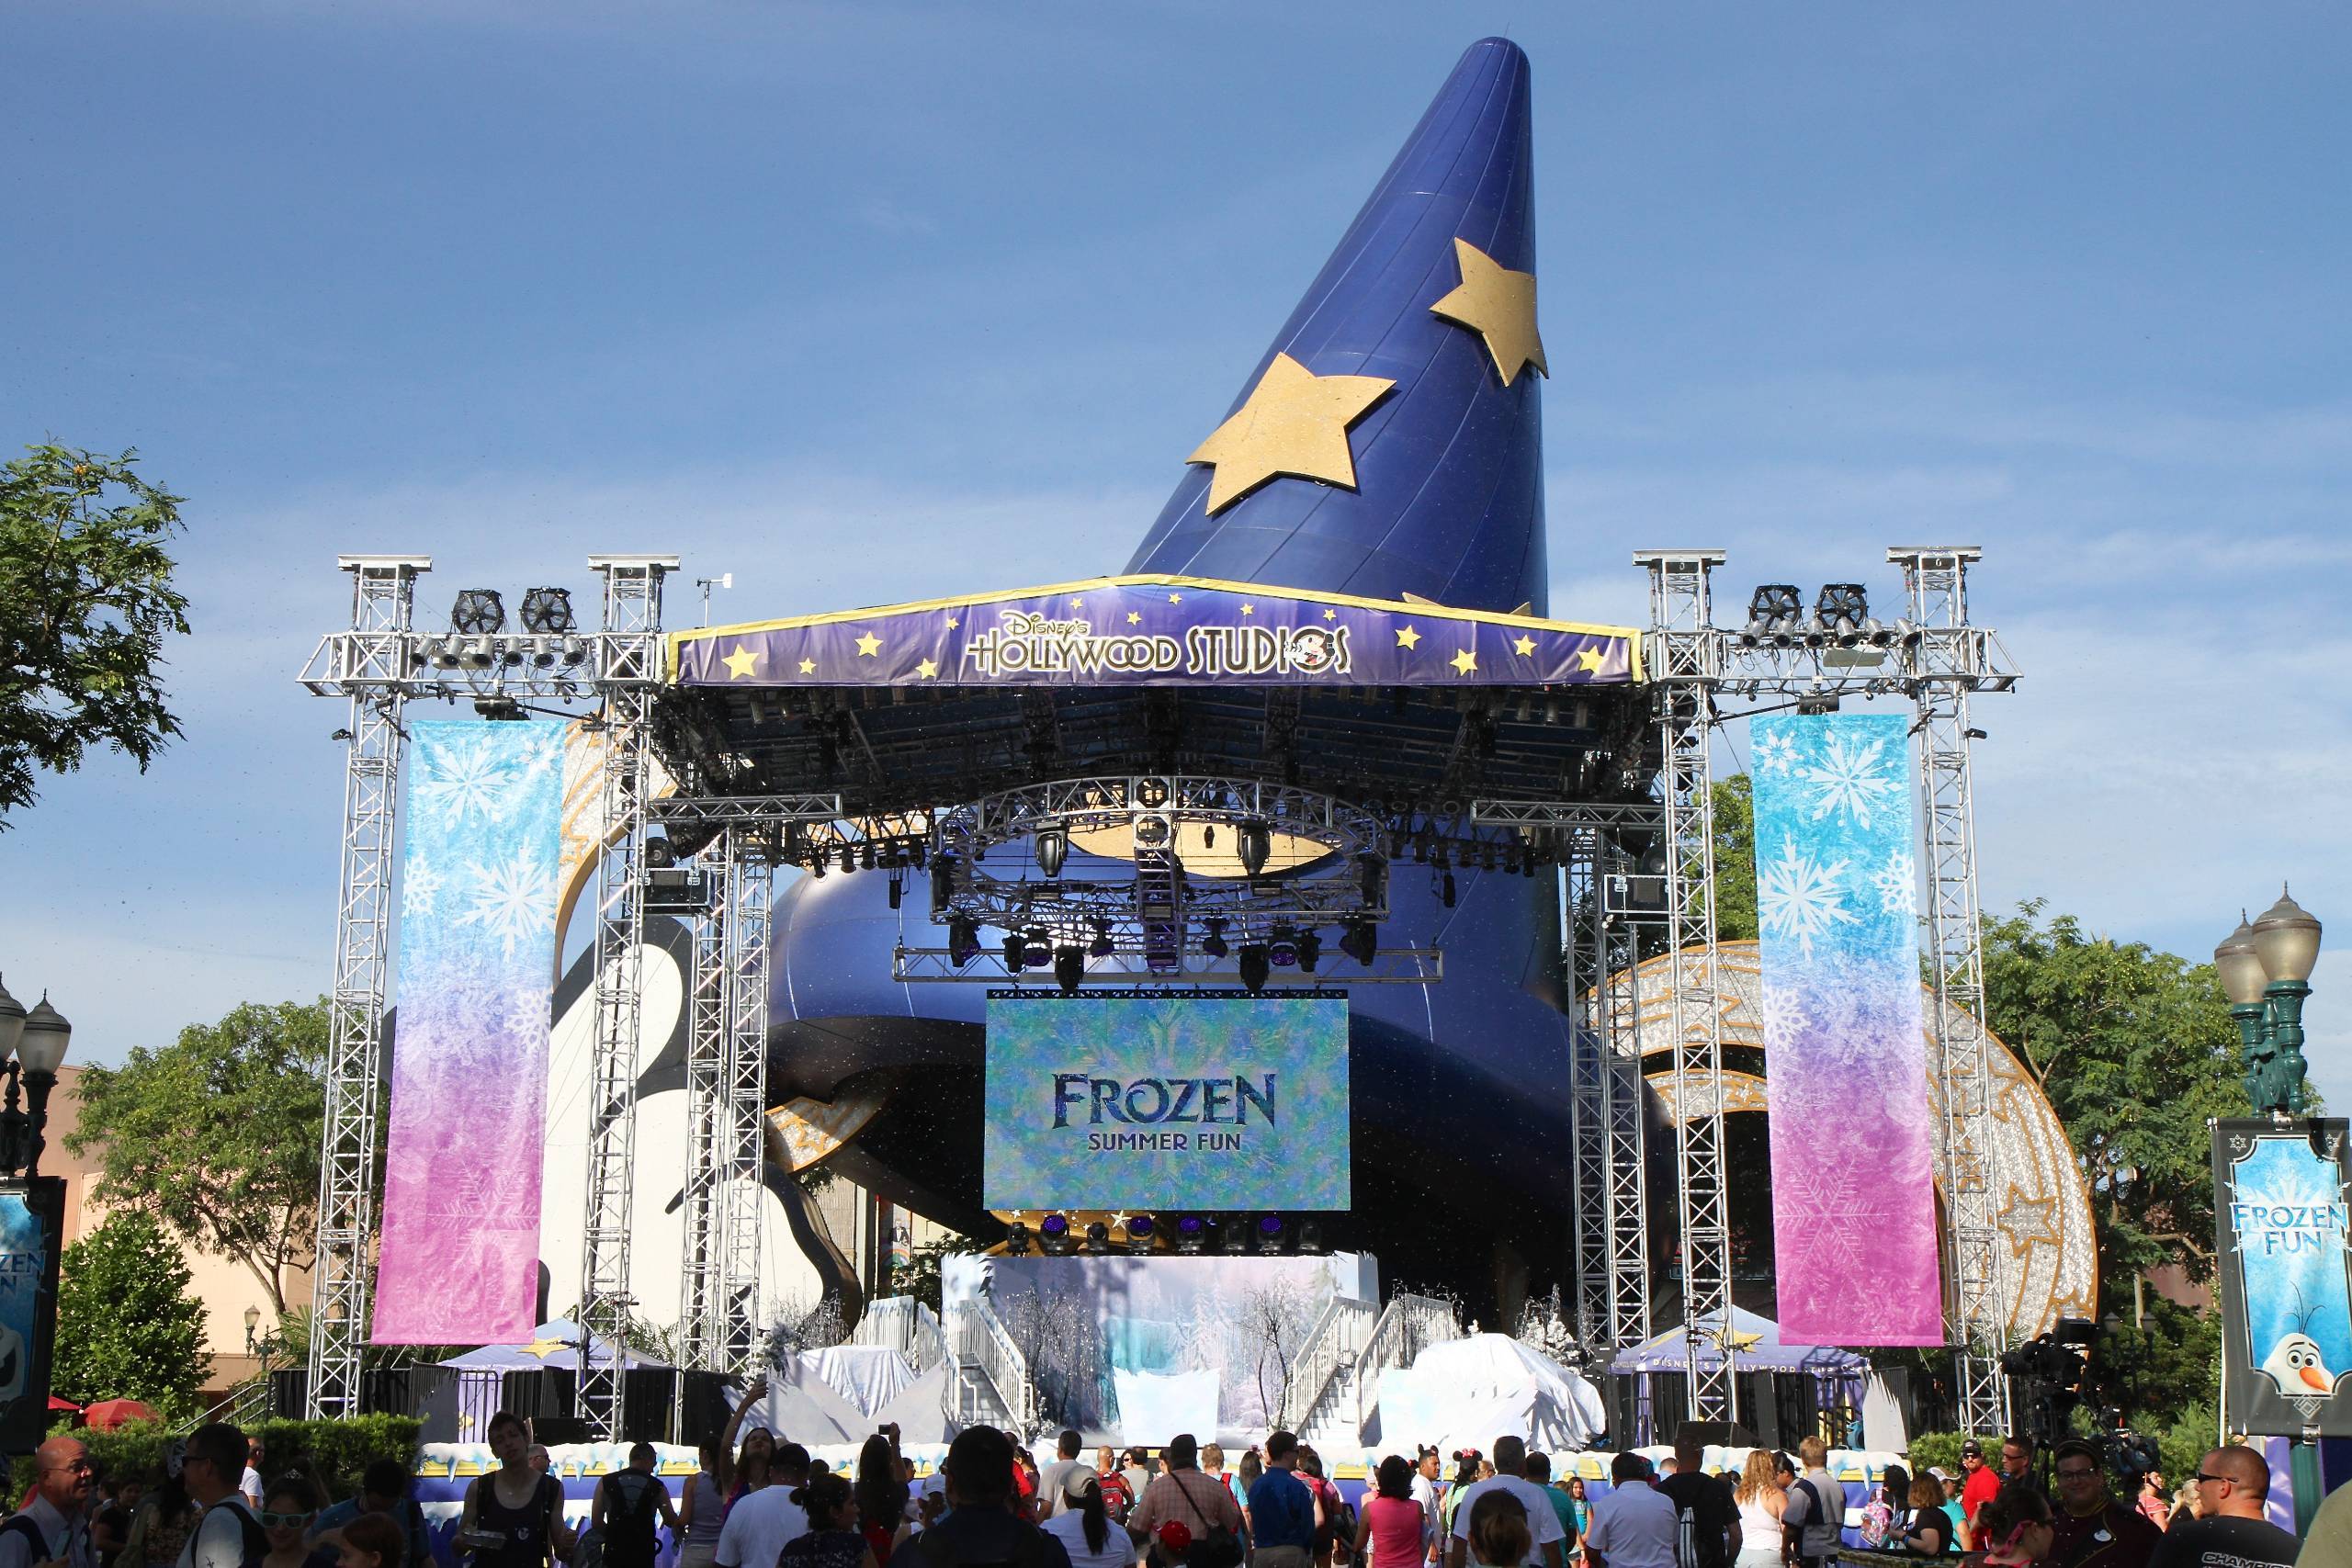 Frozen Summer Fun - Stage setup for welcome